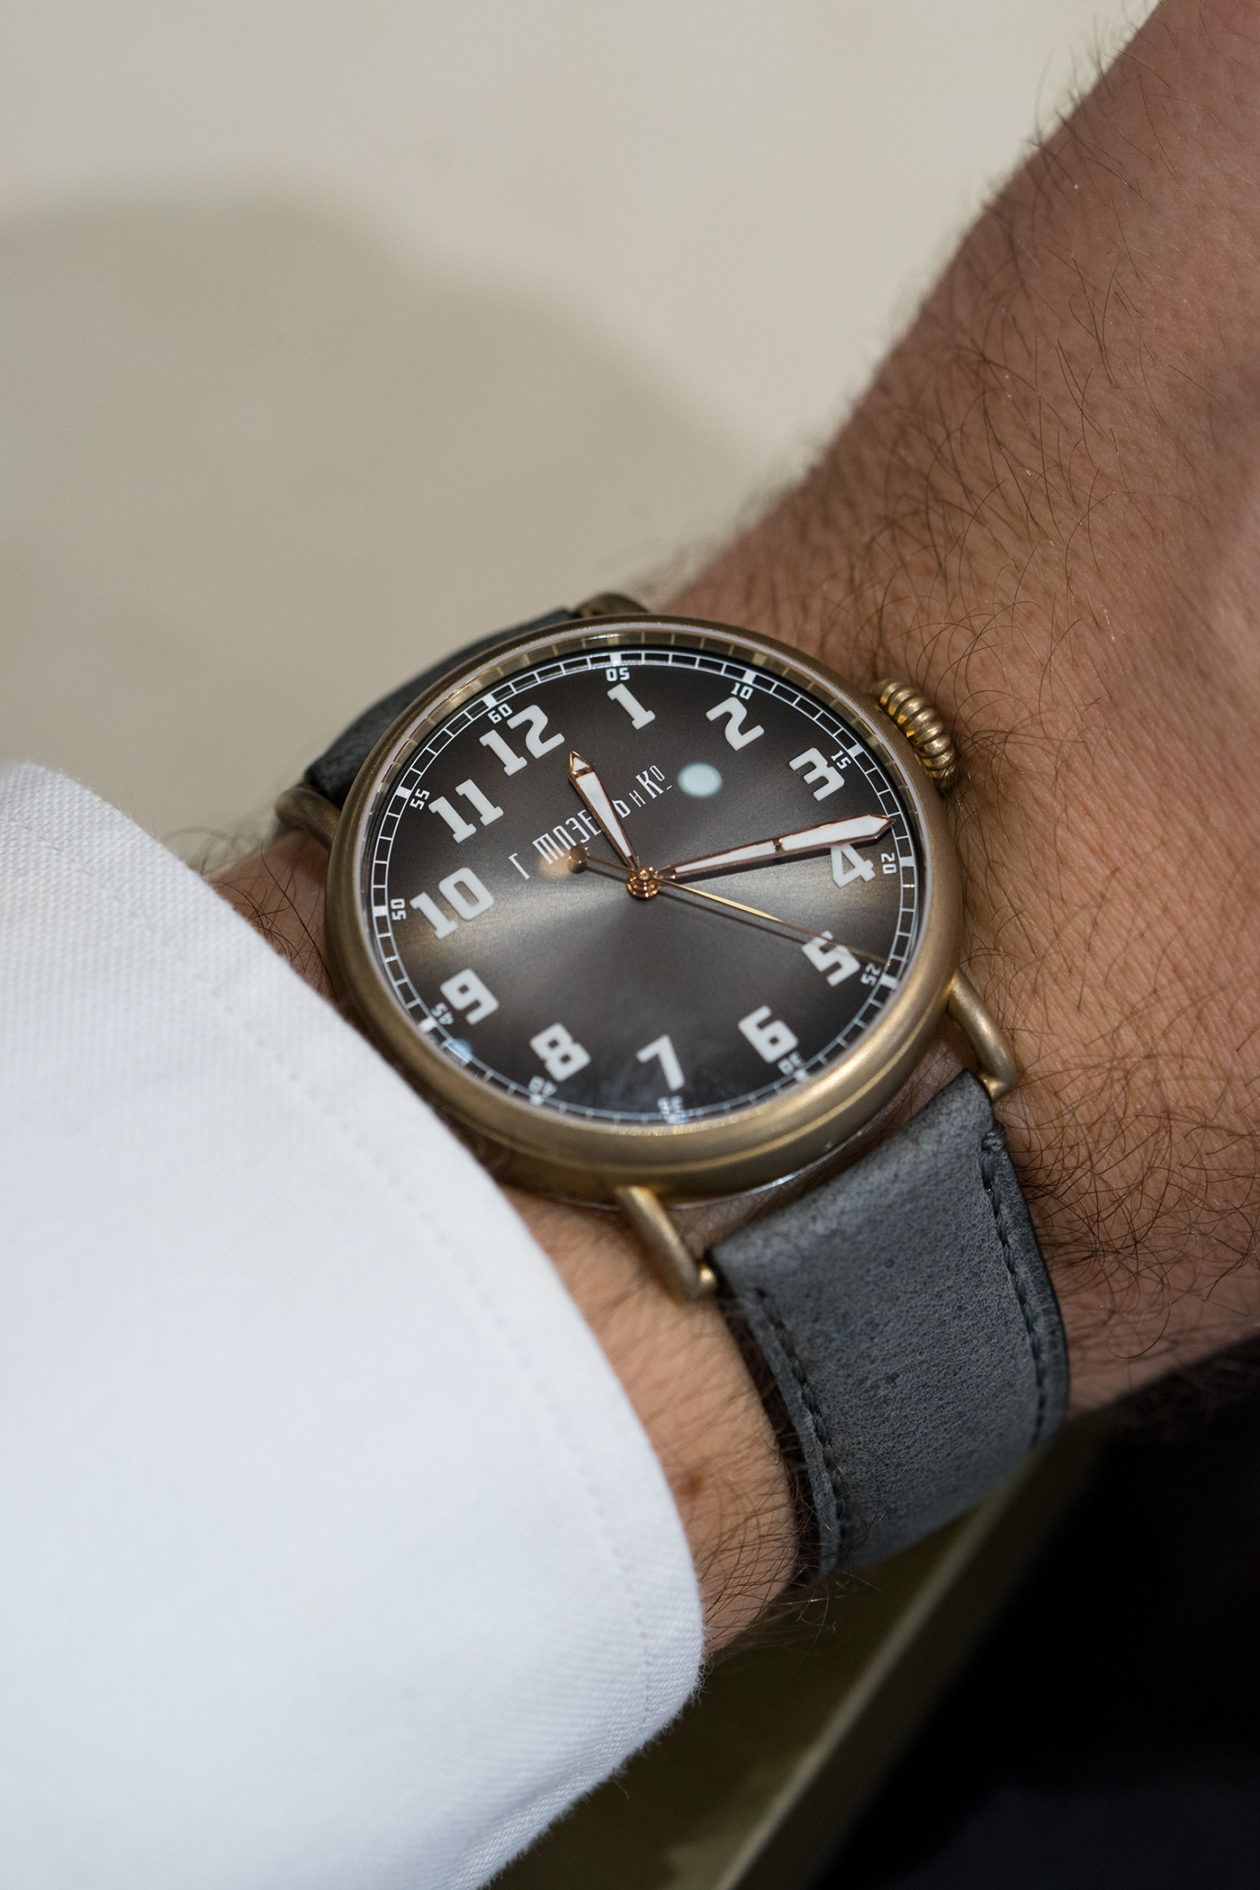 H. Moser & Cie. Heritge Bronze “Since 1828”